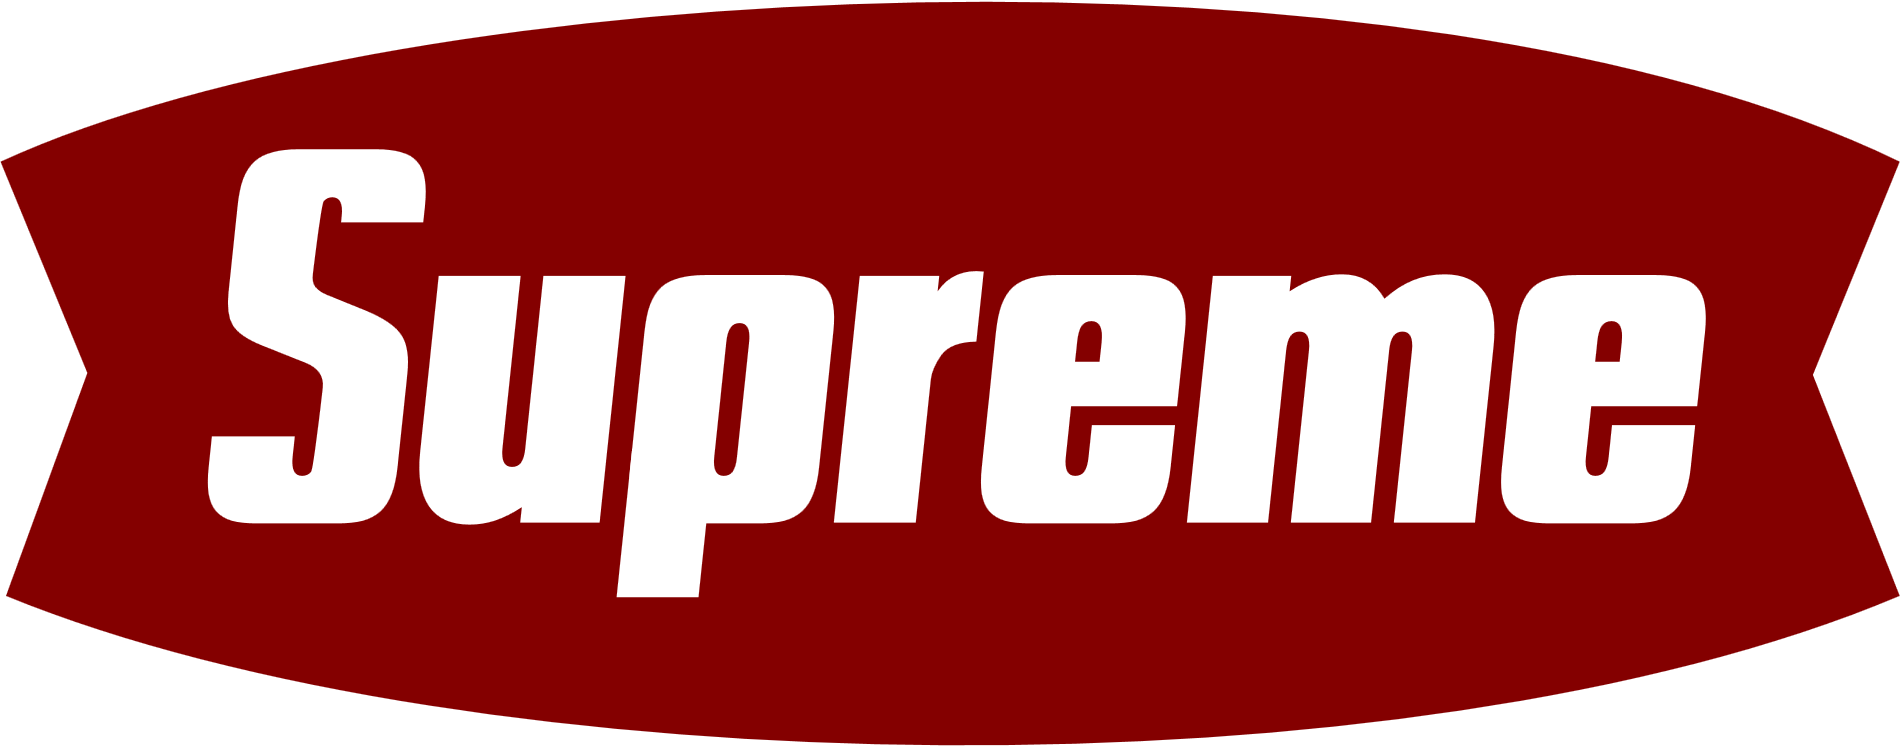 Supreme if it was made in the late 1950s by YTV7 on DeviantArt